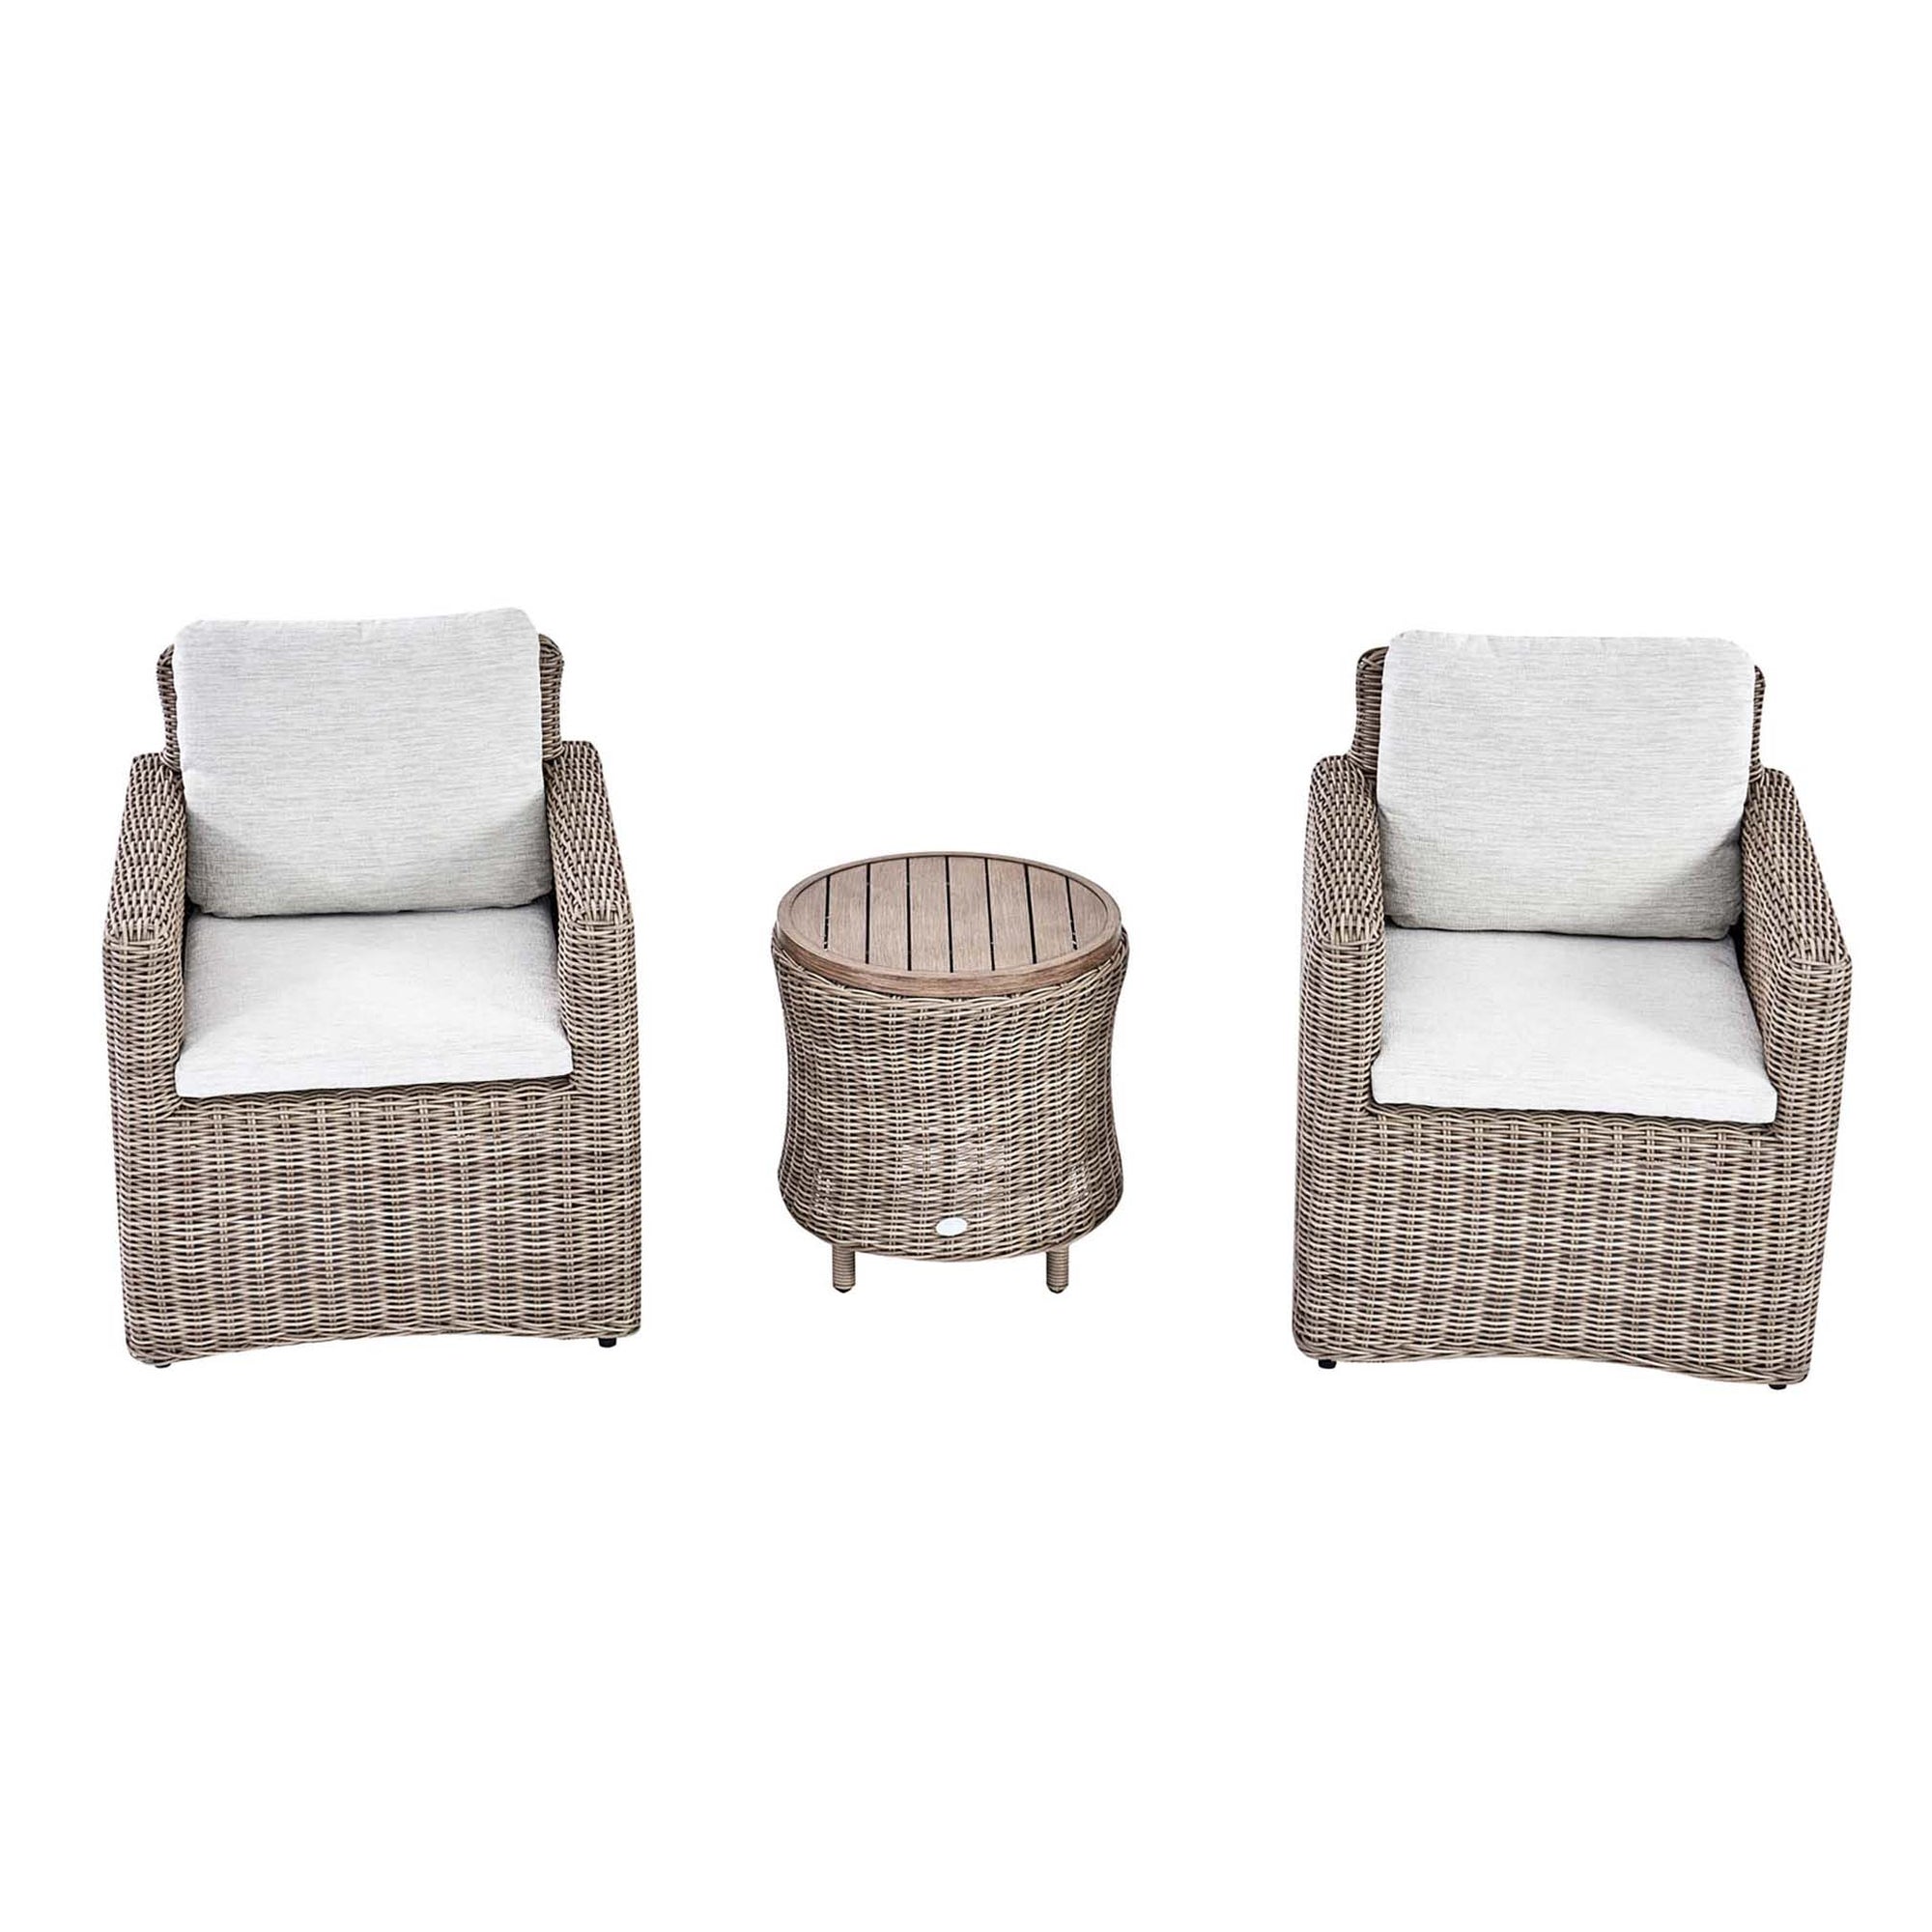 Bellagio Round Wicker Bistro Set with Rising Side Table, Natural